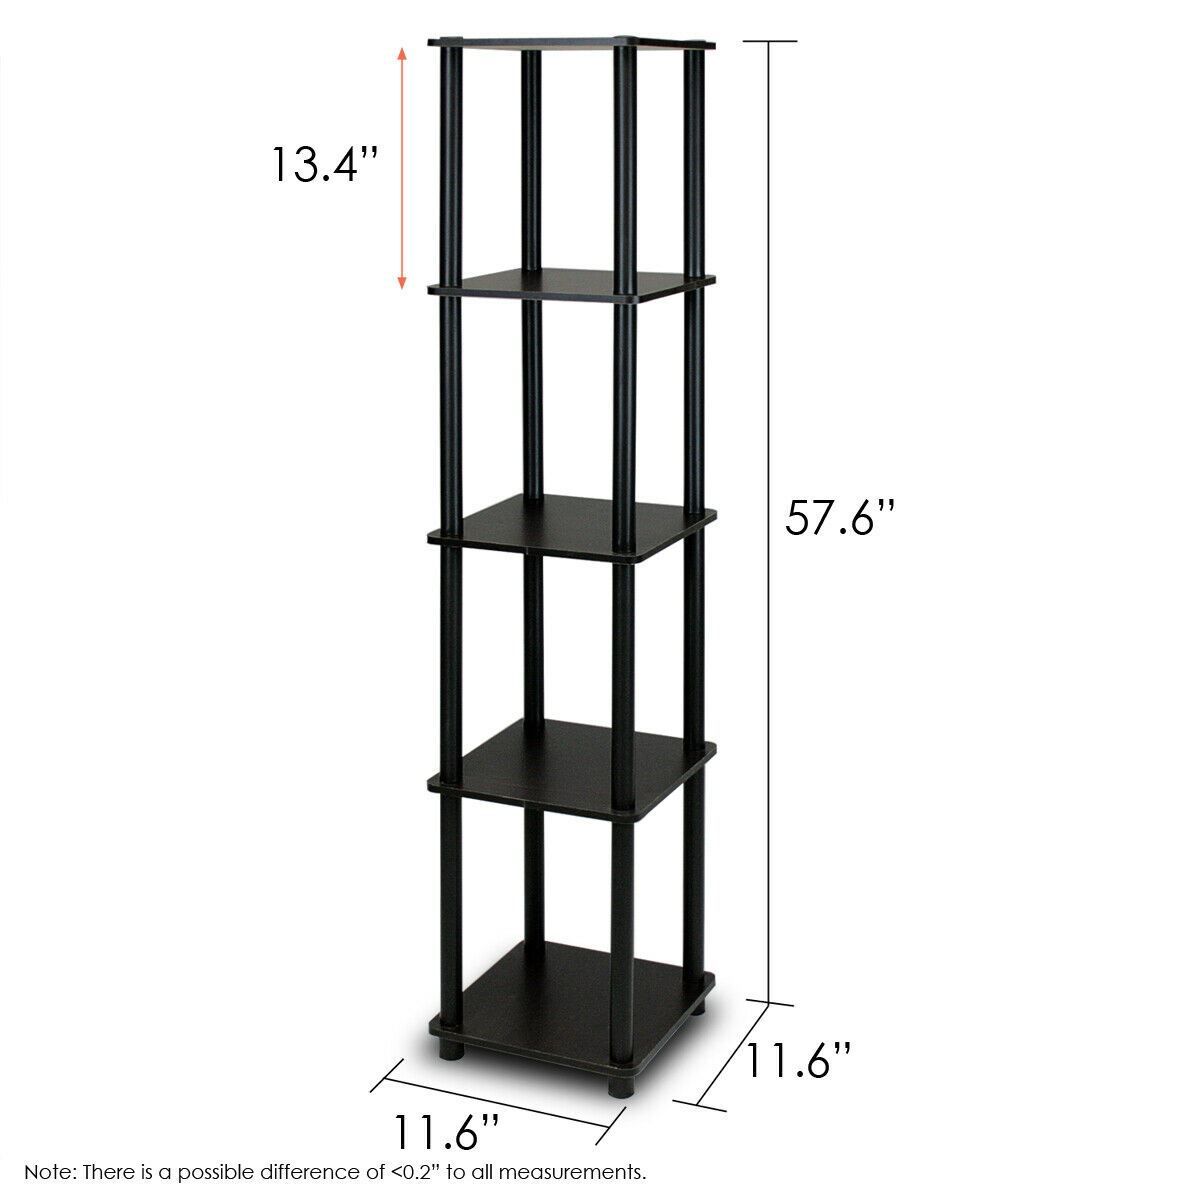 - Furinno Turn-N-Tube Home Living Mini Storage and Organization Series: 5-Tiers No Tools Tube Storage Shelving Unit .
- Smart Design: Easy Assembly and No tools required. 
- Just repeat the twist, turn and stack mechanism, and the whole unit can be assembled within 10 minutes.
- All the products are produced and assembled 100-percent in Malaysia with 95% - 100% recycled materials.
- Care instructions: wipe clean with clean damped cloth. Avoid using harsh chemicals.